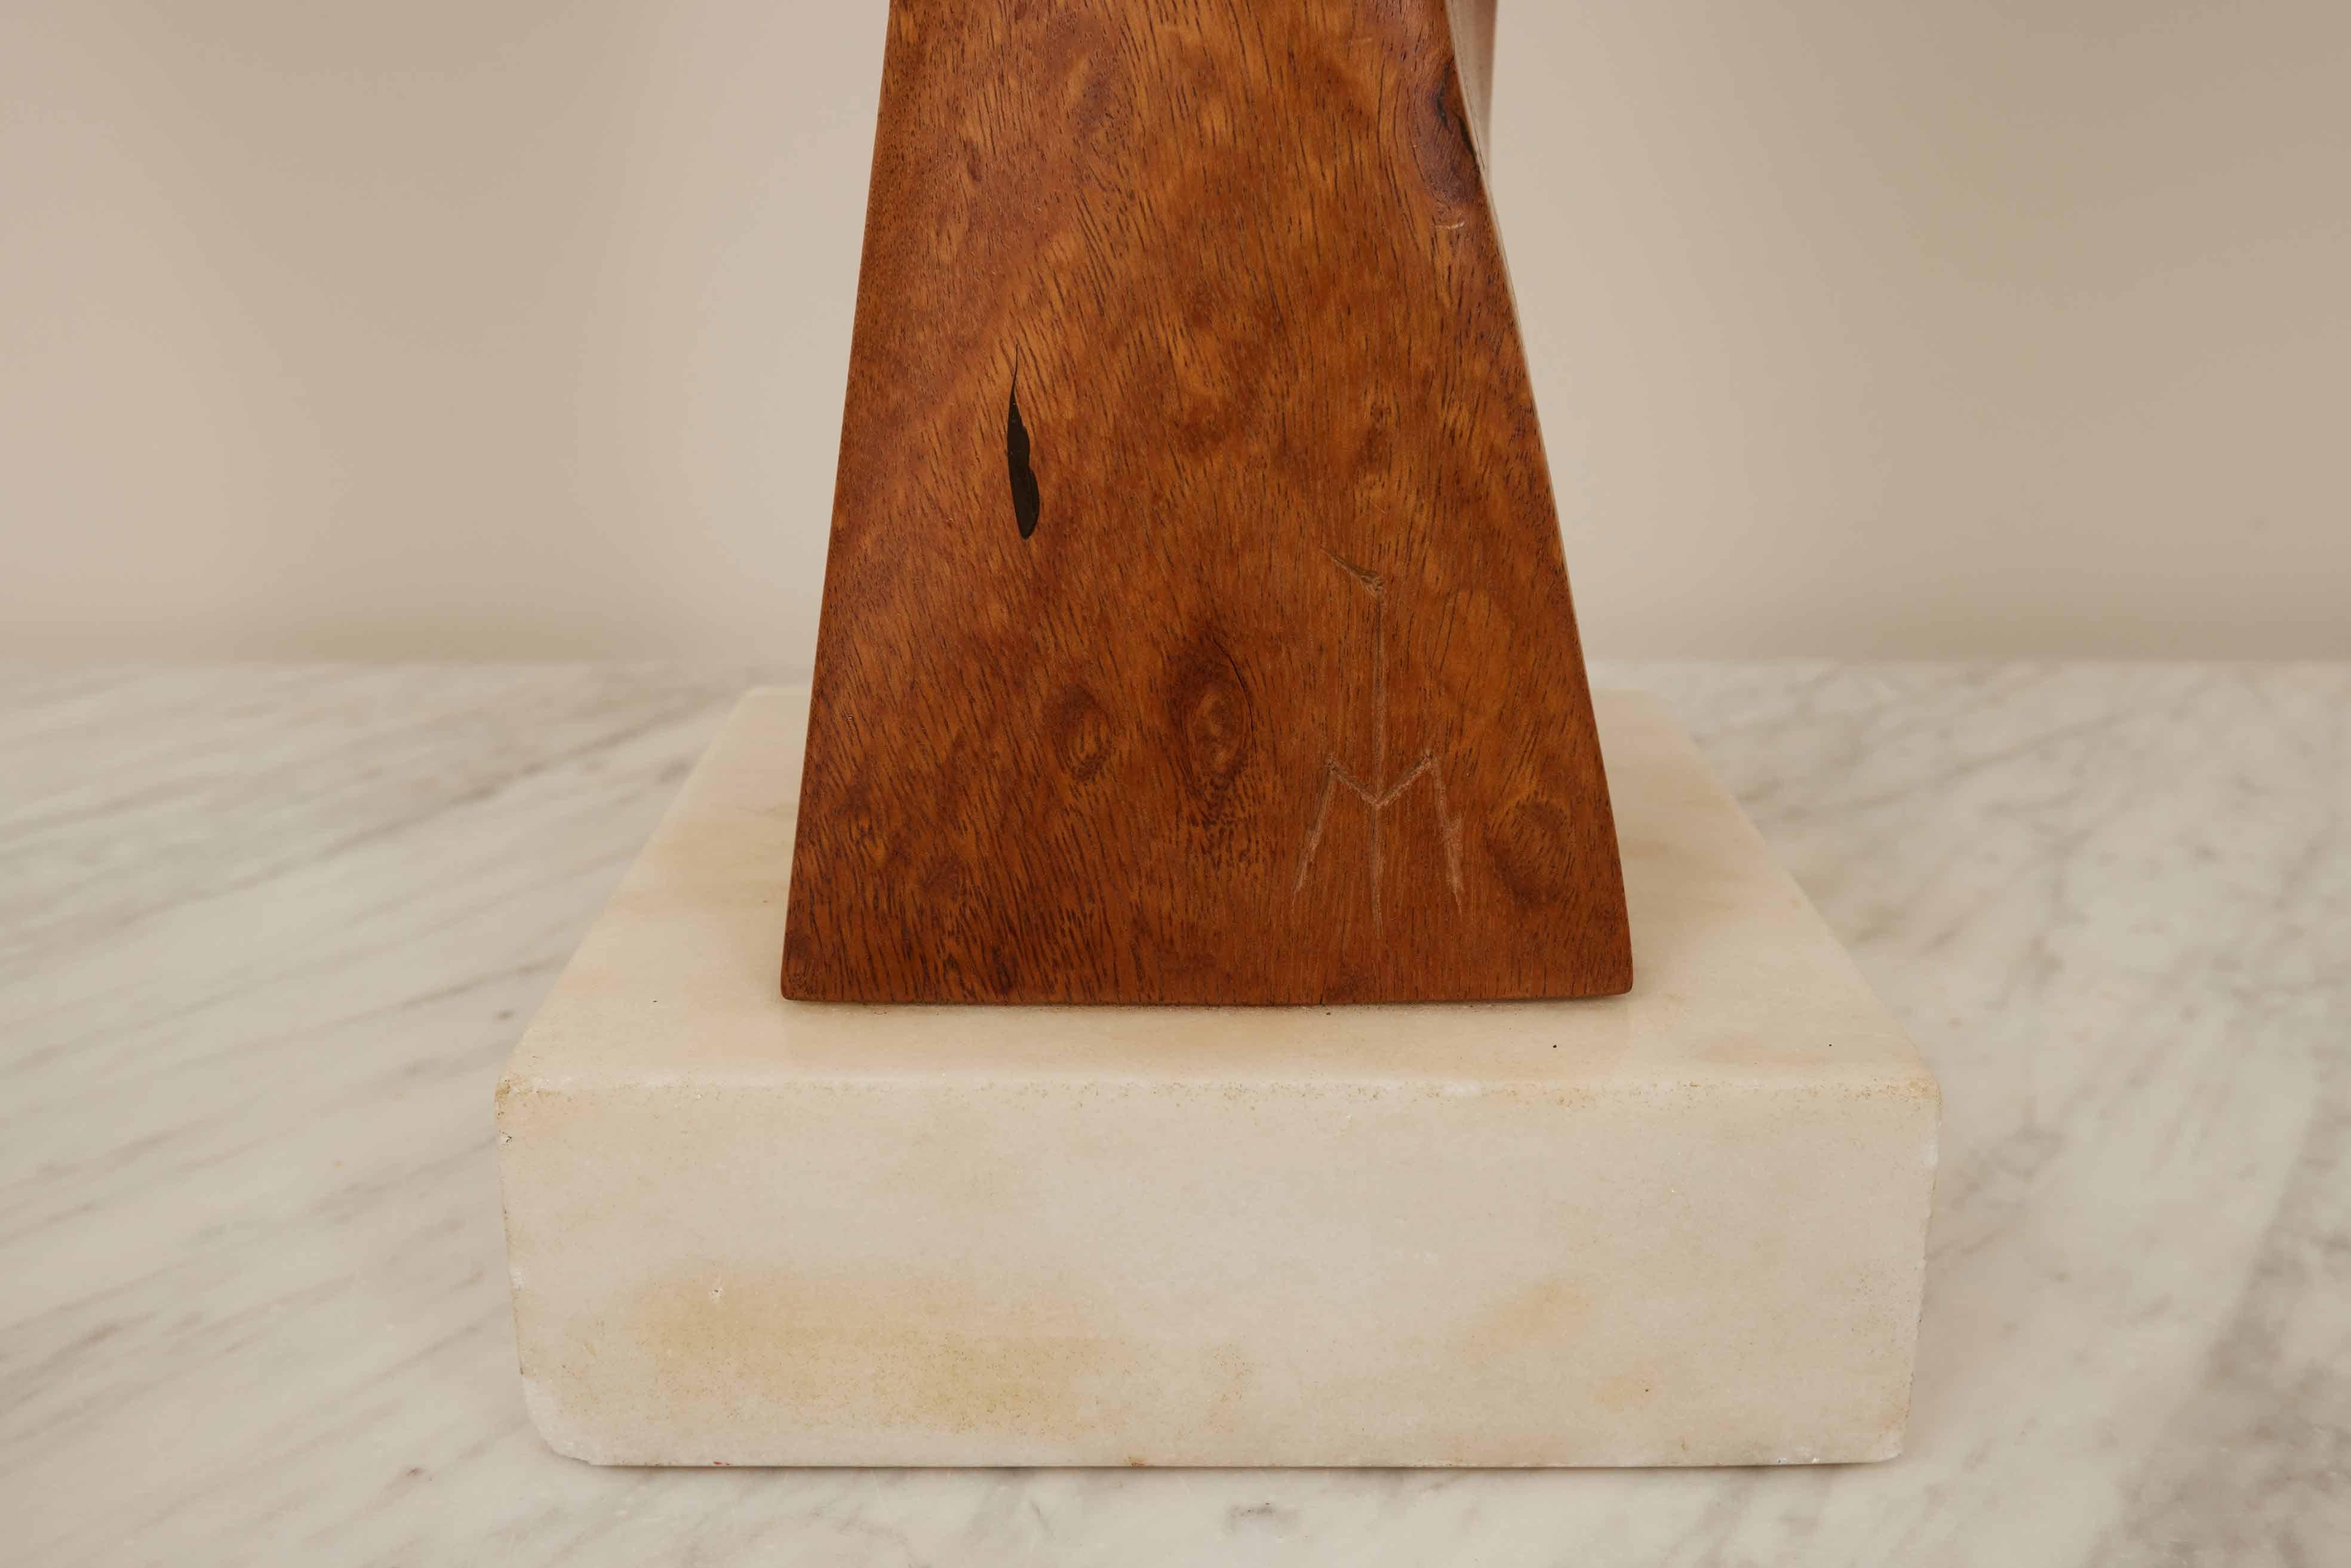 Henry Moretti Mahogany Sculpture  1970s

Discover this striking large mahogany sculpture by Henry Moretti, a renowned French sculptor who found his artistic liberation in the USA post-war. Born in 1913 and passing in 2015, Moretti's career spanned